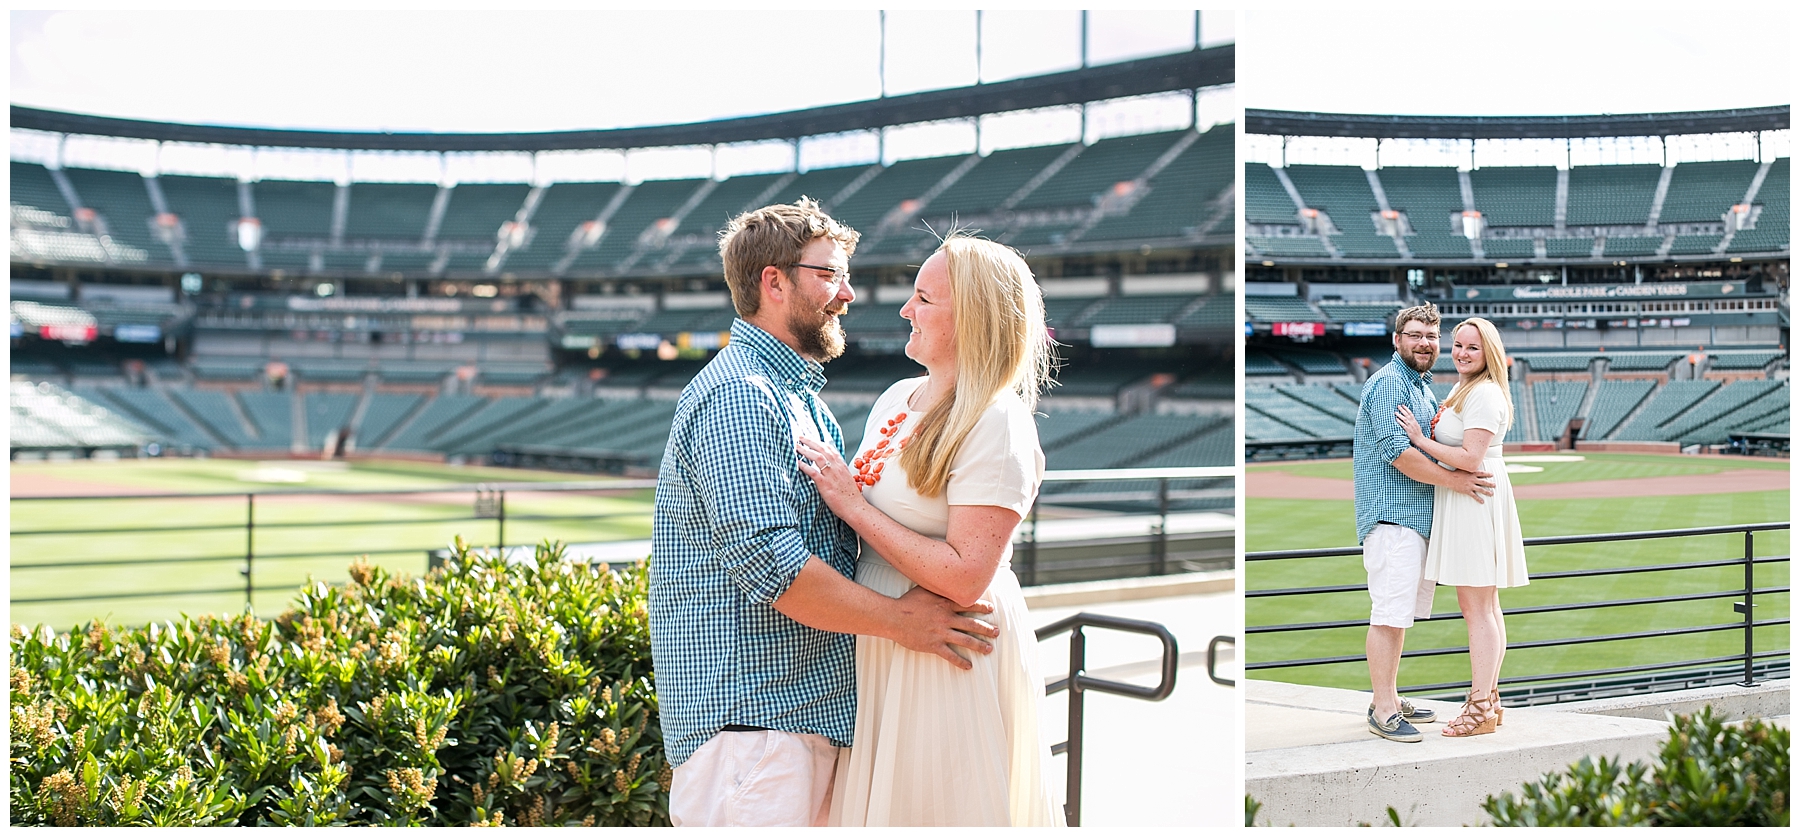 Tess Ray Camden Yards Engagement Session Living Radiant Photography photos_0024.jpg